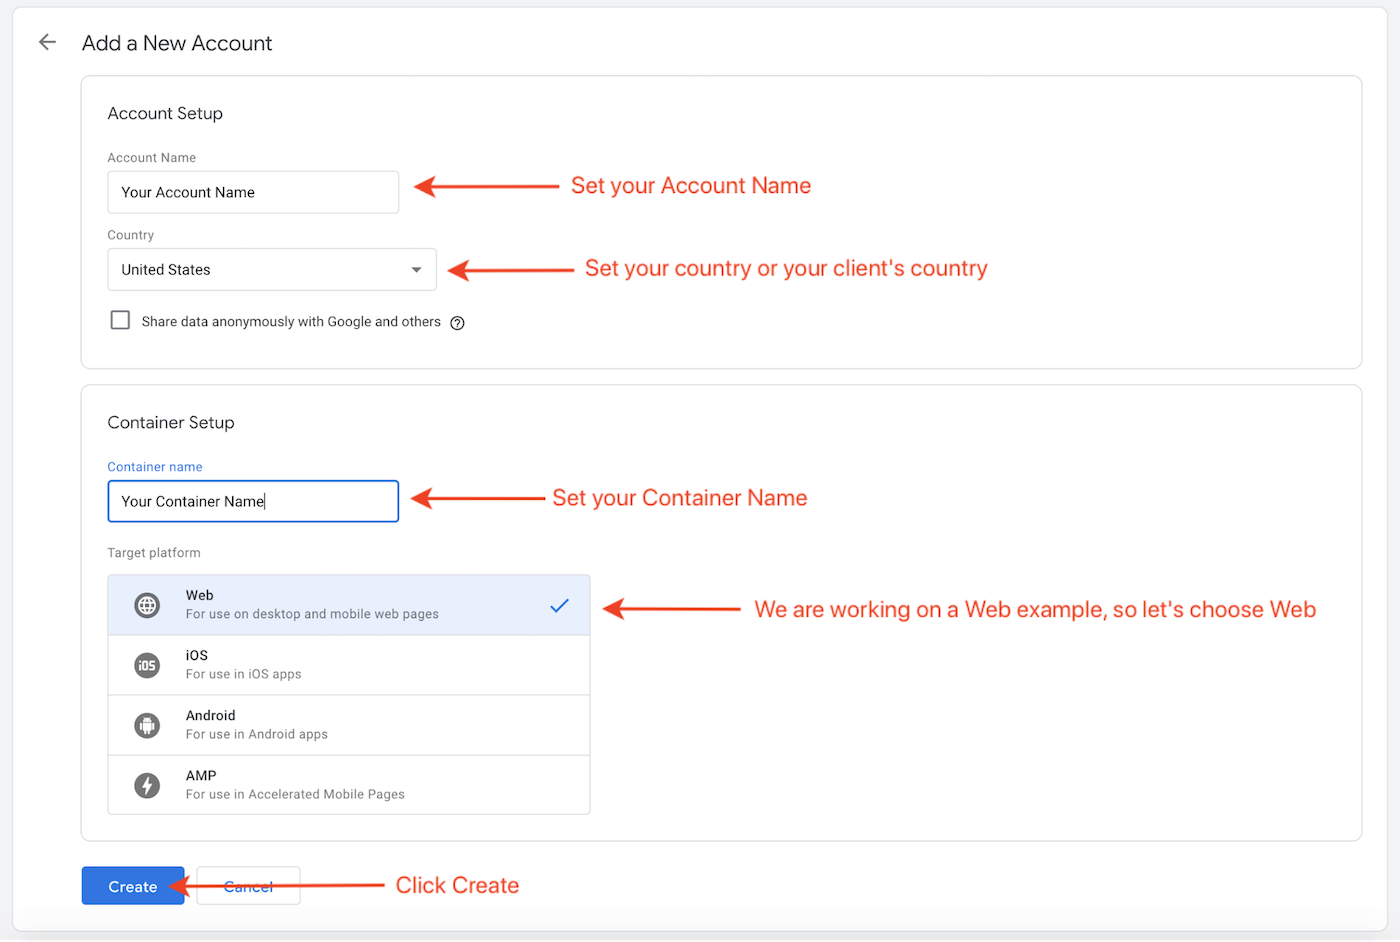 Set your Account Name, set your country or your client's country, set your Container Name, Choose Web, Click Create